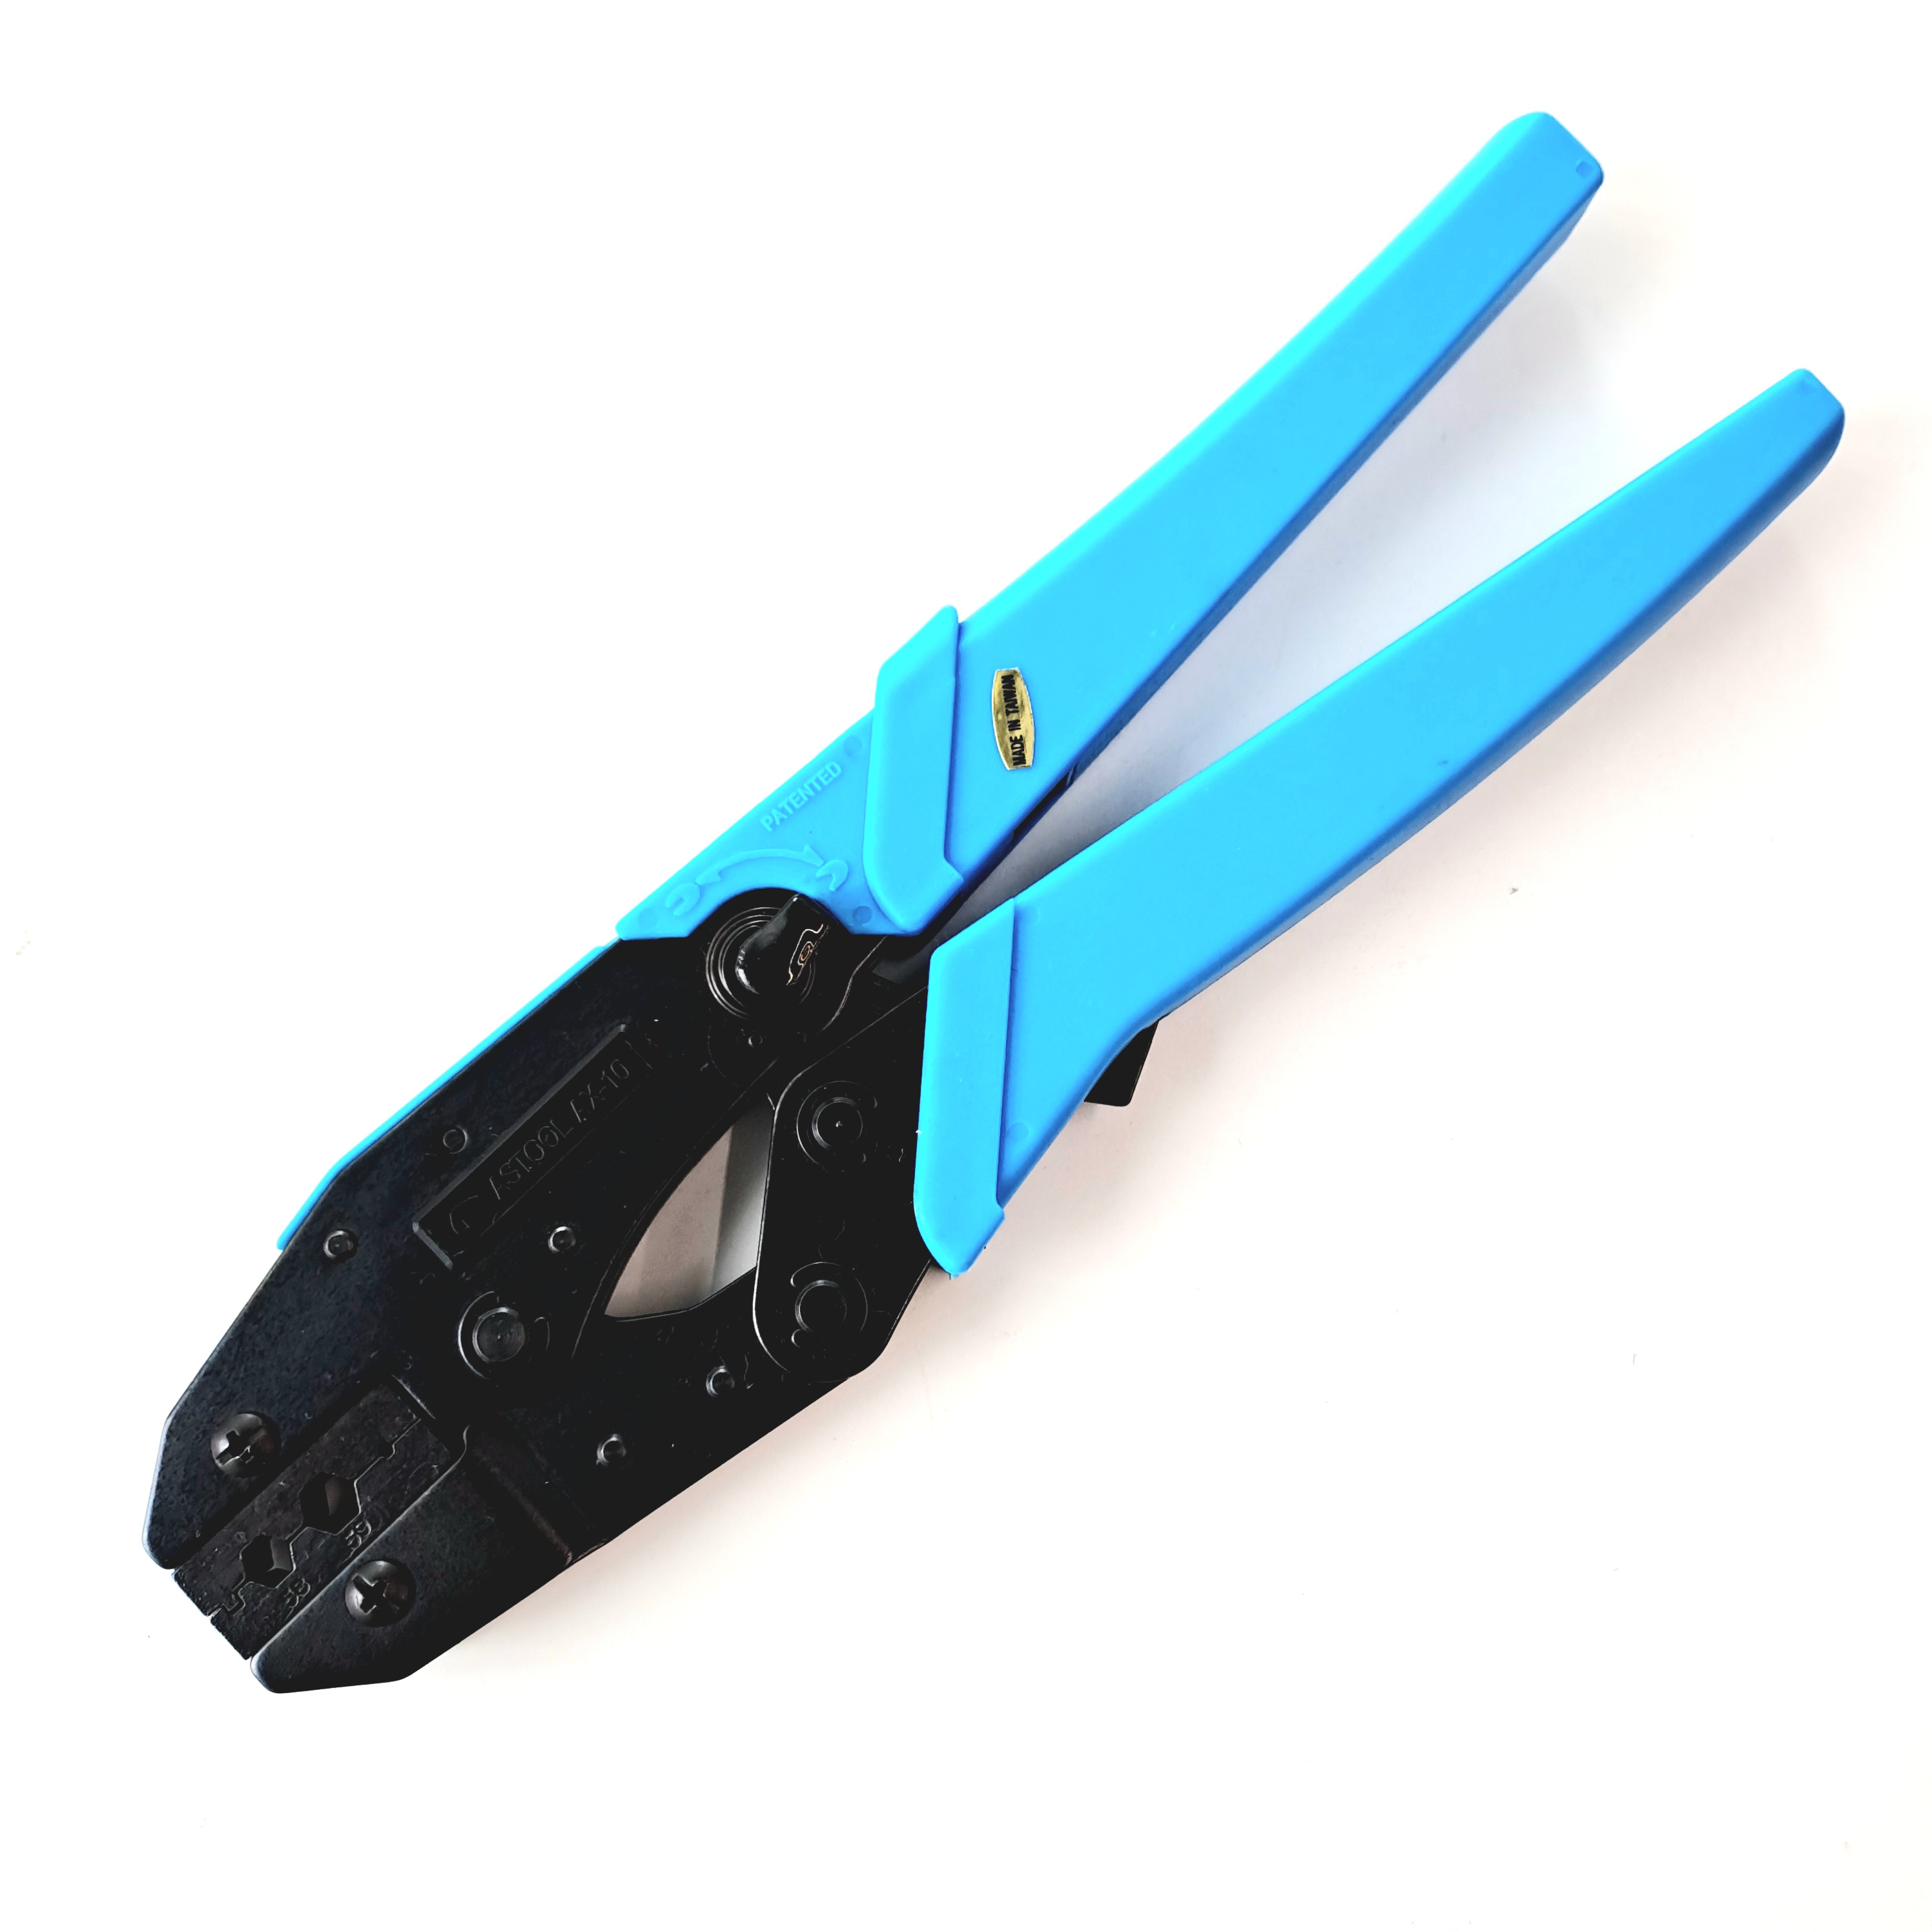 Ratchet Coaxial Crimping Tool HT-1001 for RG58/59/62, RF195/240